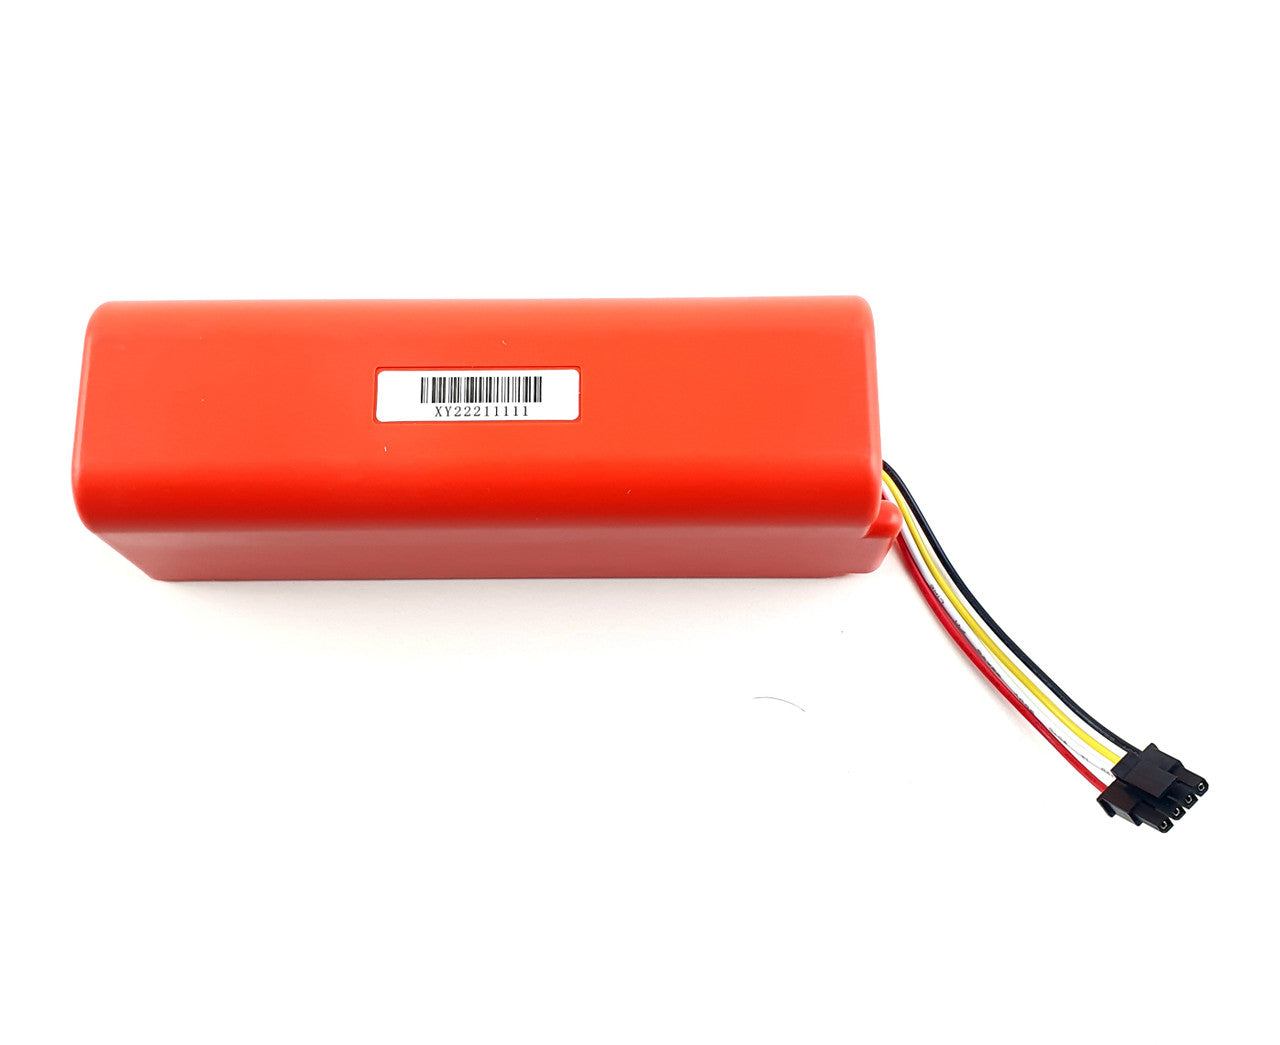 Battery for Roborock Q7, S7, S6, S5, Mi Series Robot Vacuum Cleaners - SILBERSHELL